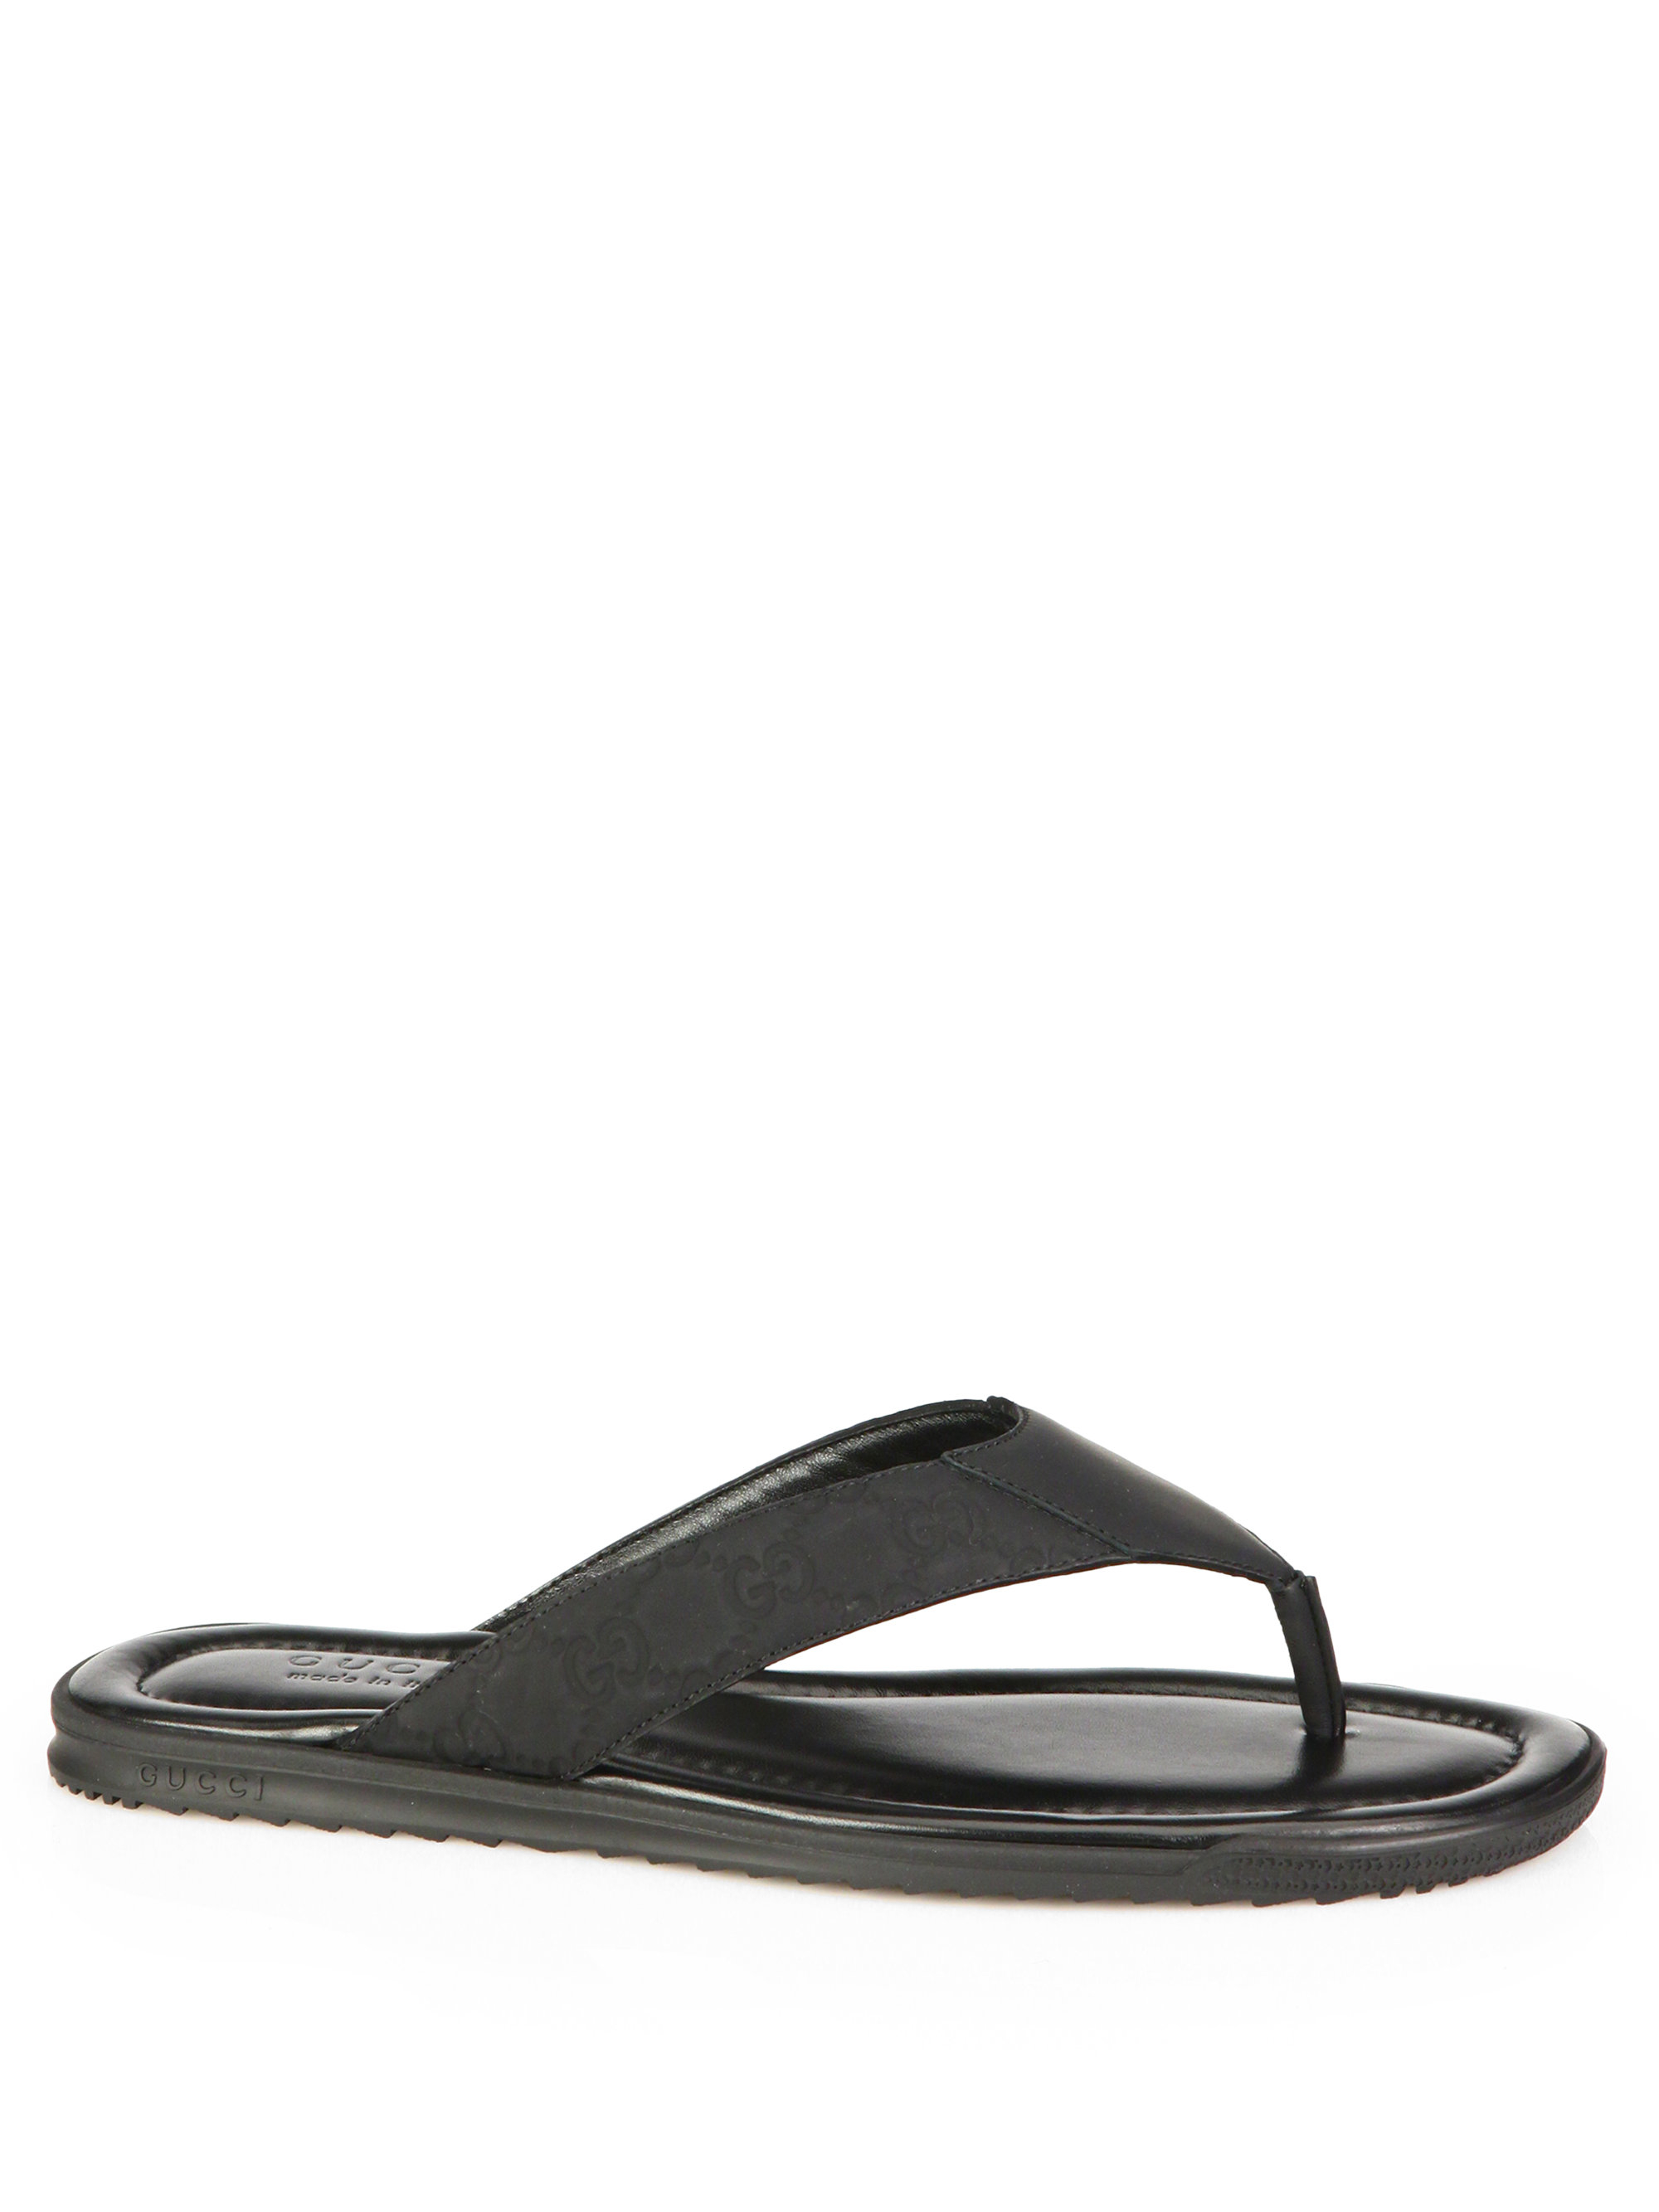 Gucci Rubberized Leather Gg Thong Flip Flops in Black for Men | Lyst